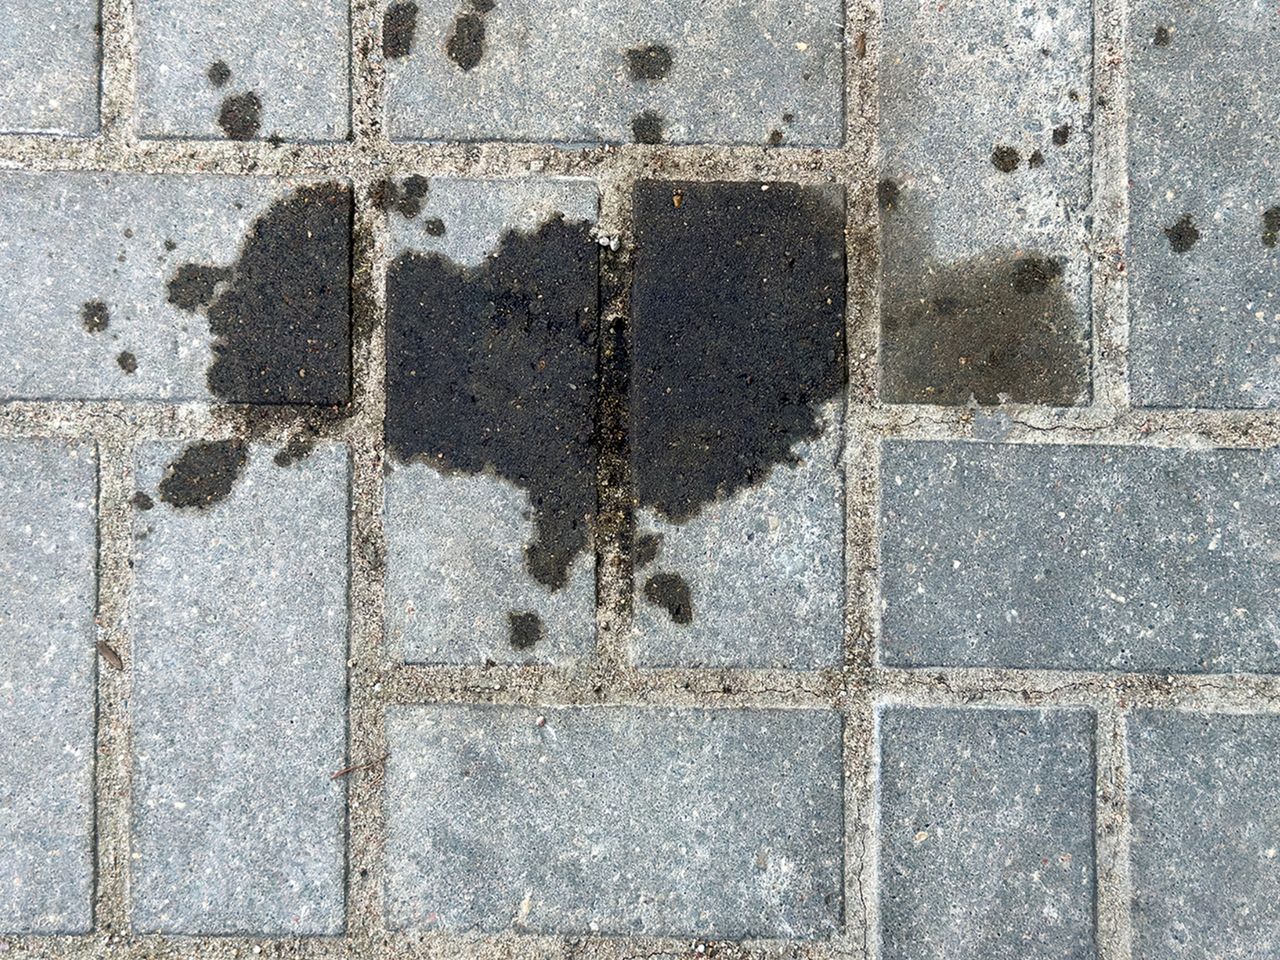 Revive your paving stones with these DIY solutions for oil stains